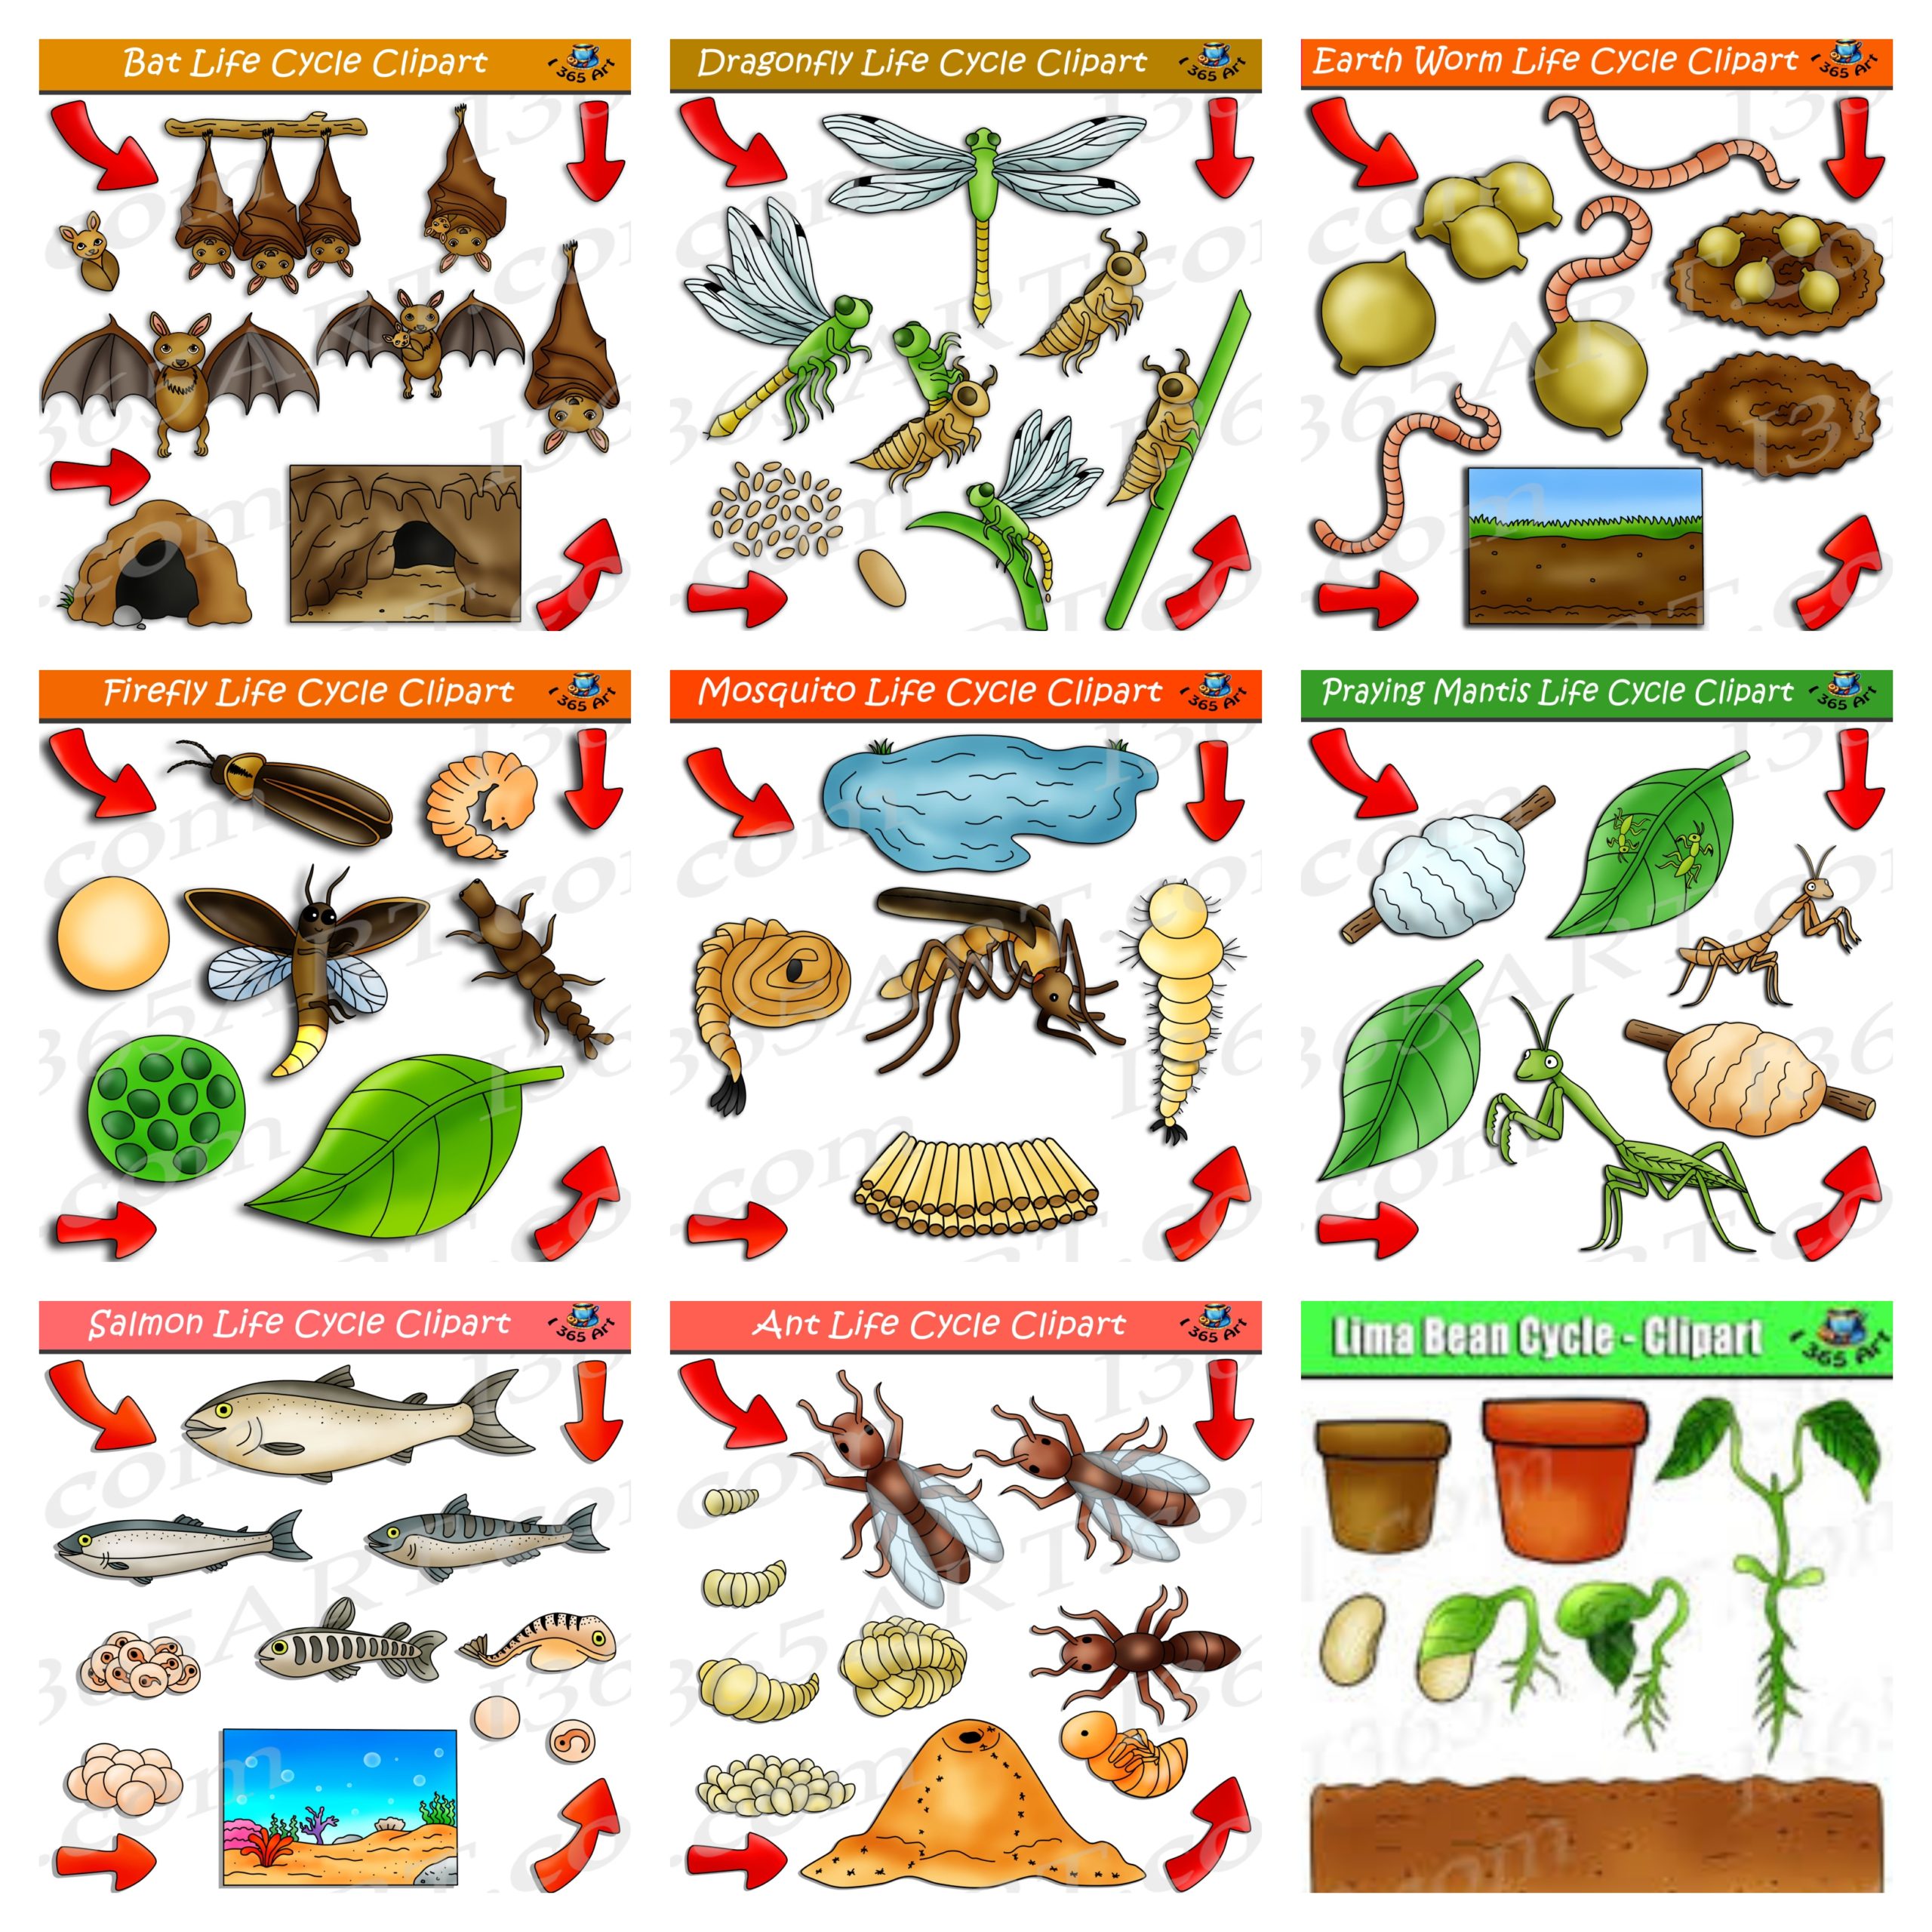 Nature Life Cycle Clipart #1 - Get 18 Sets in all! -